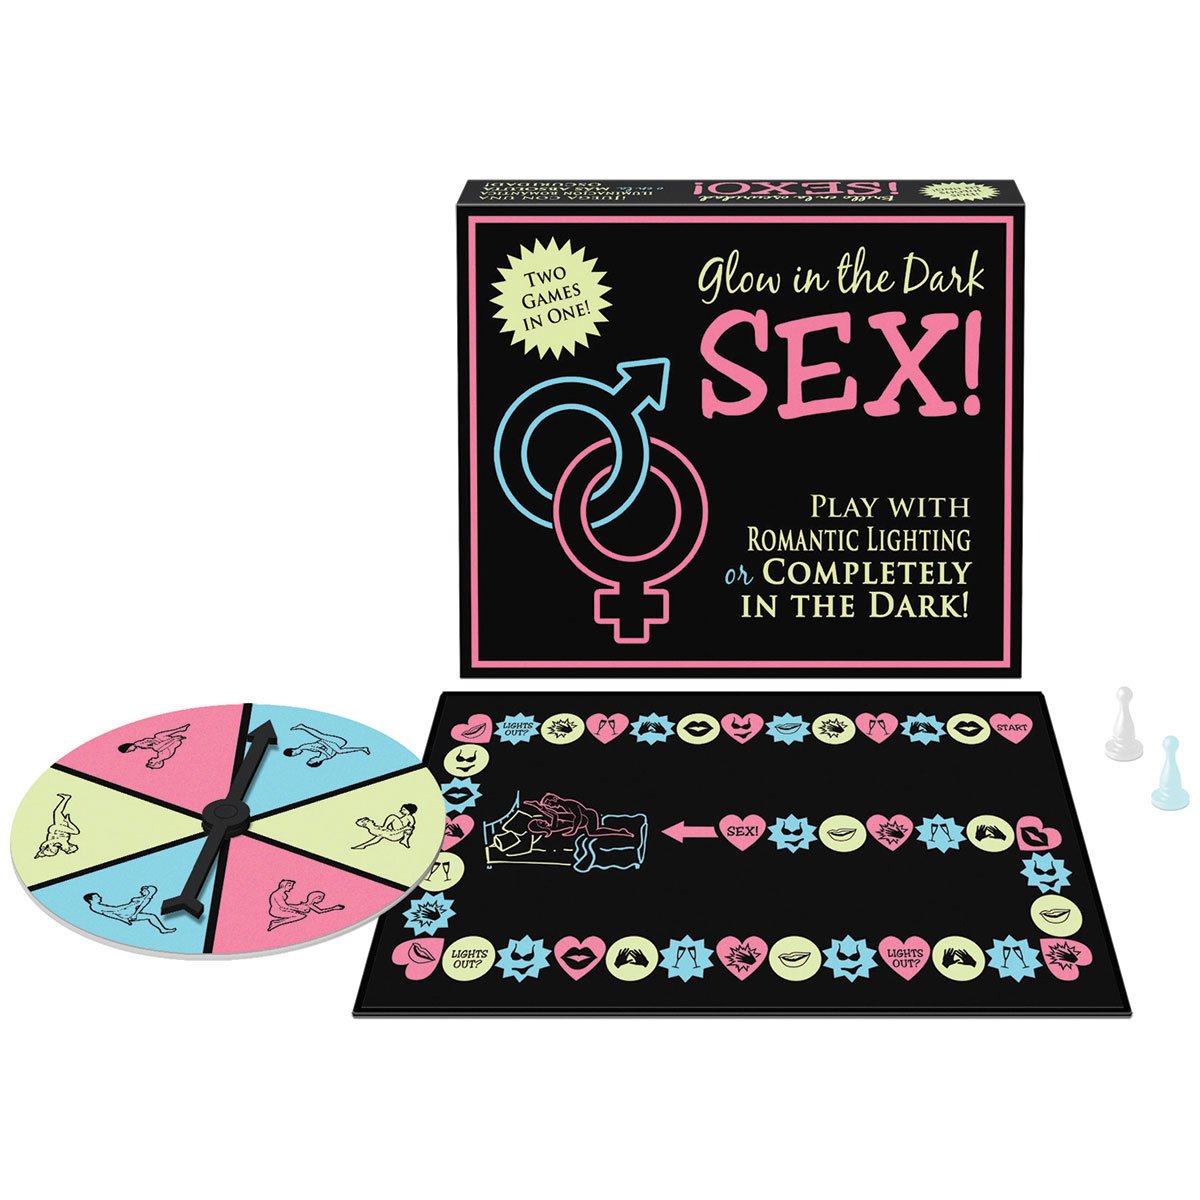 Glow in the Dark Sex! Game - Buy At Luxury Toy X - Free 3-Day Shipping